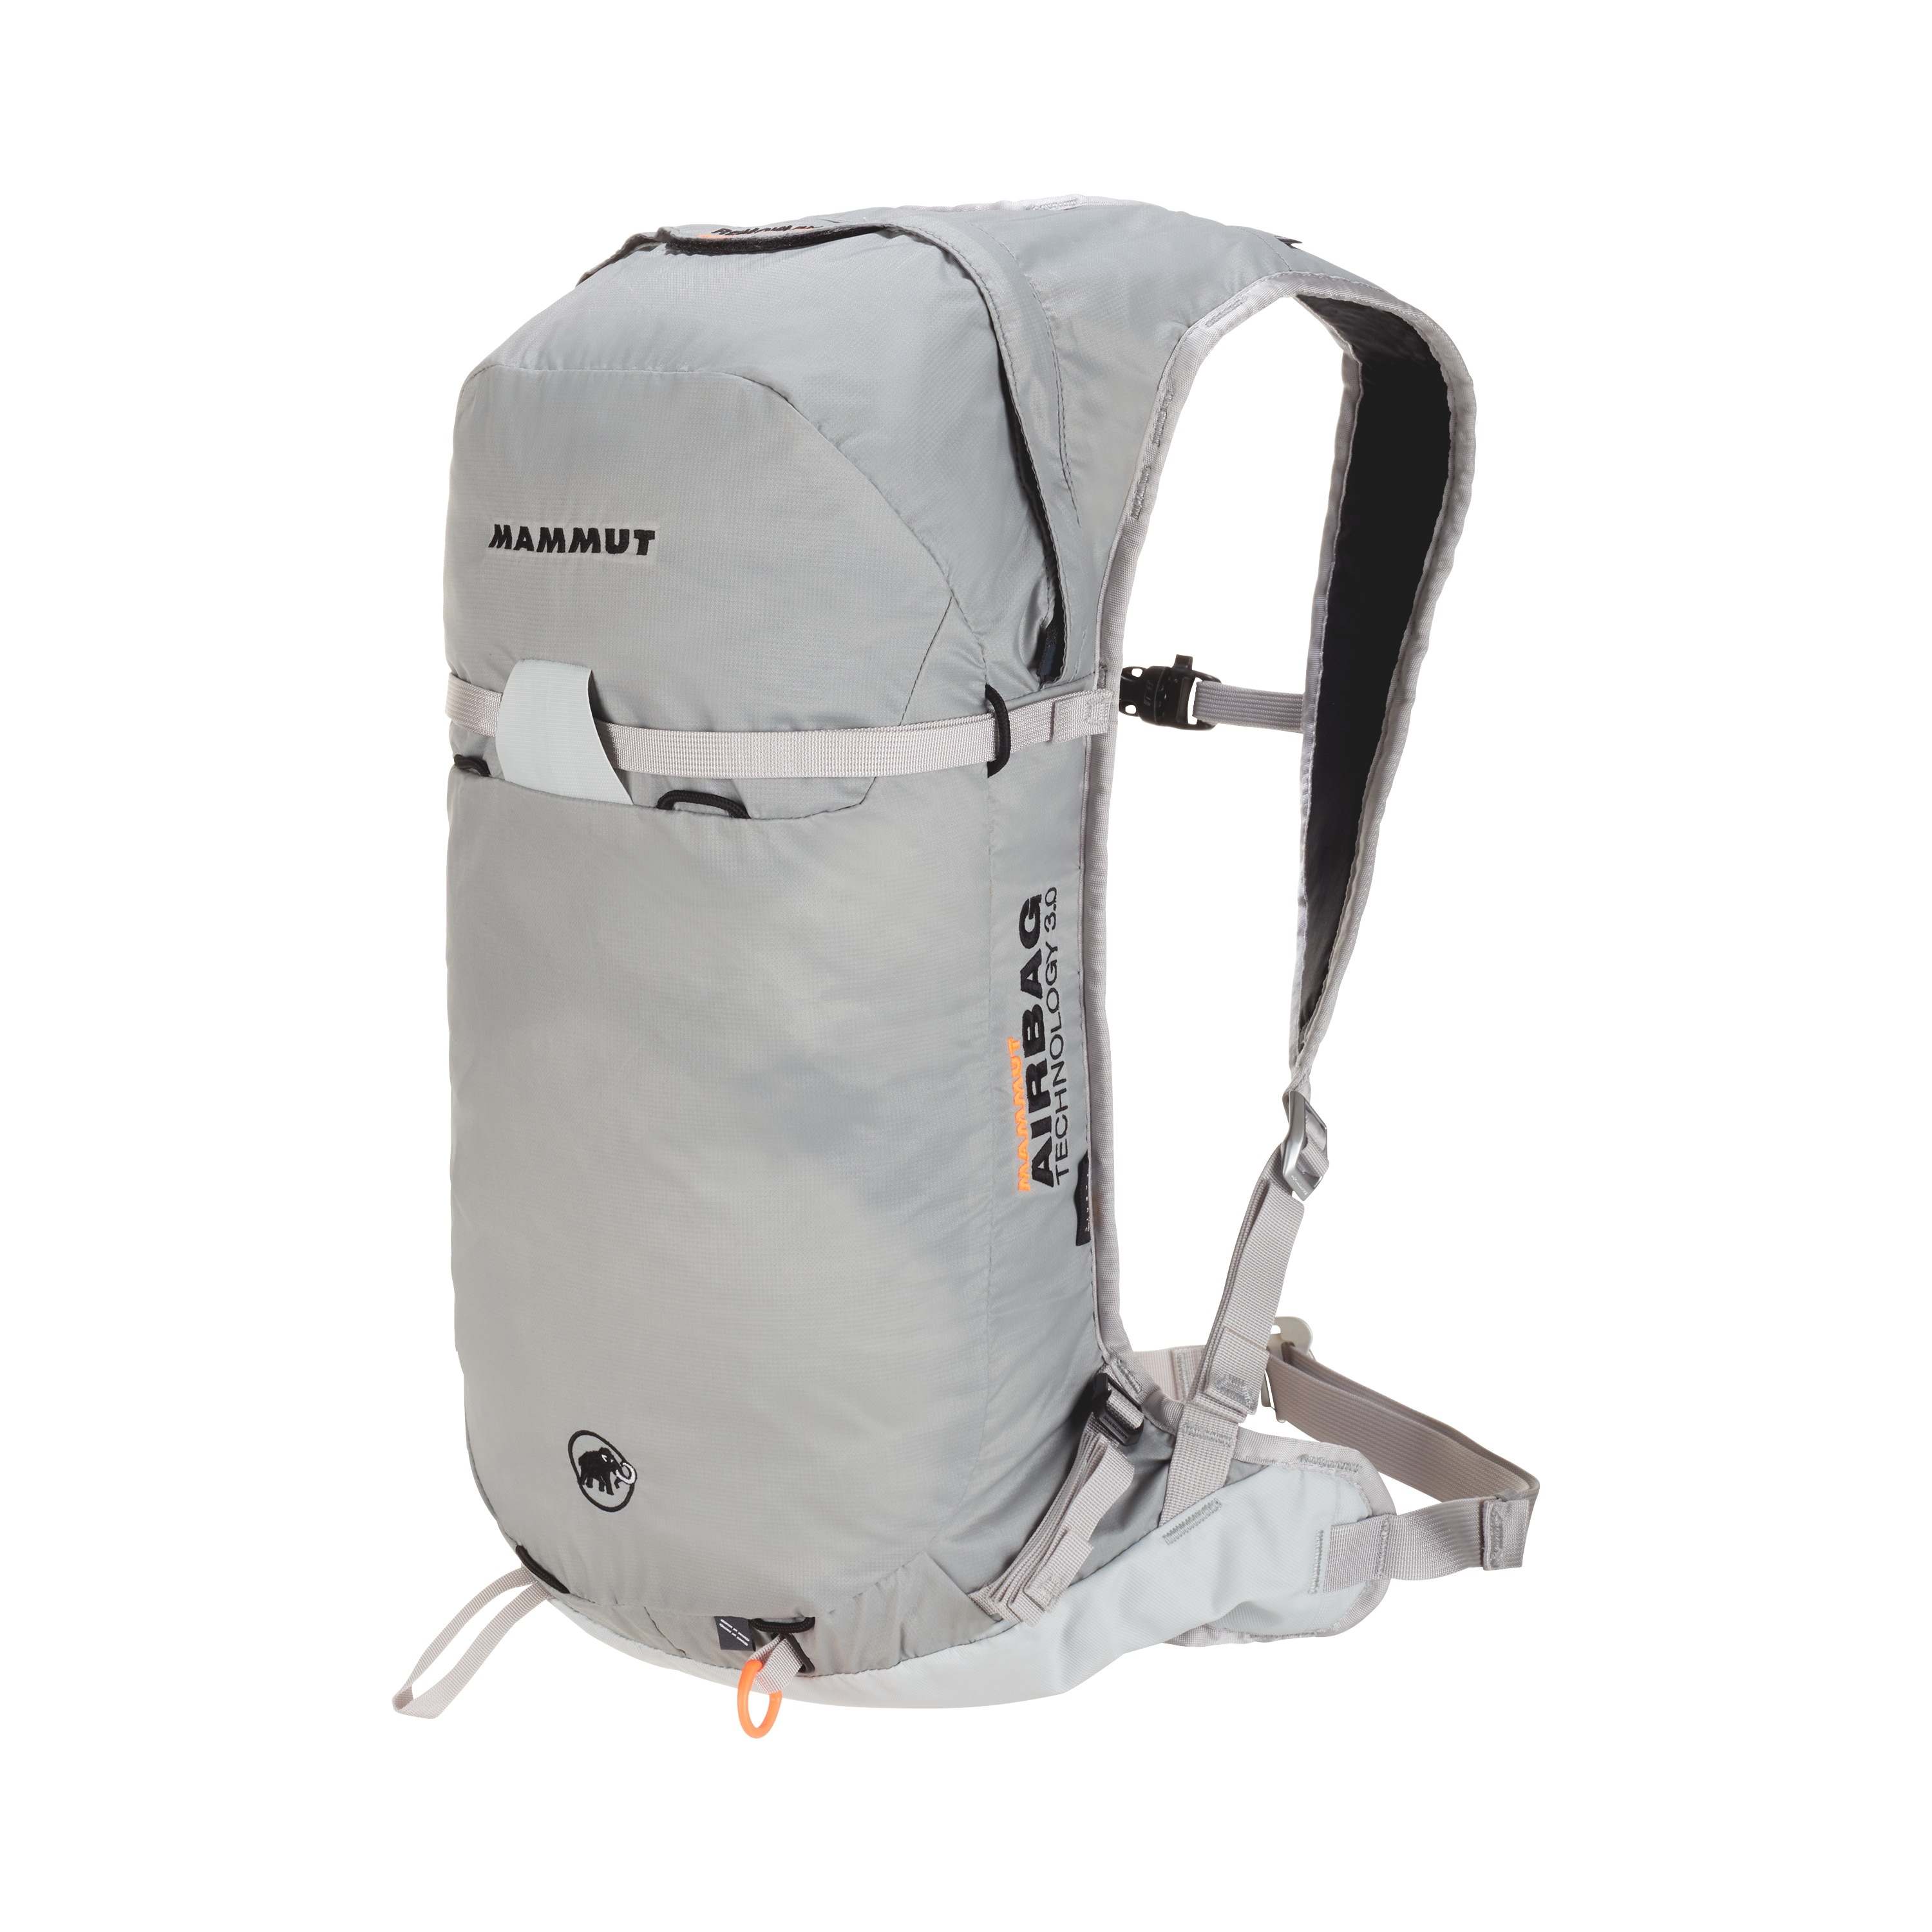 Mammut Ultralight Removable Airbag 3.0 Highway 20L